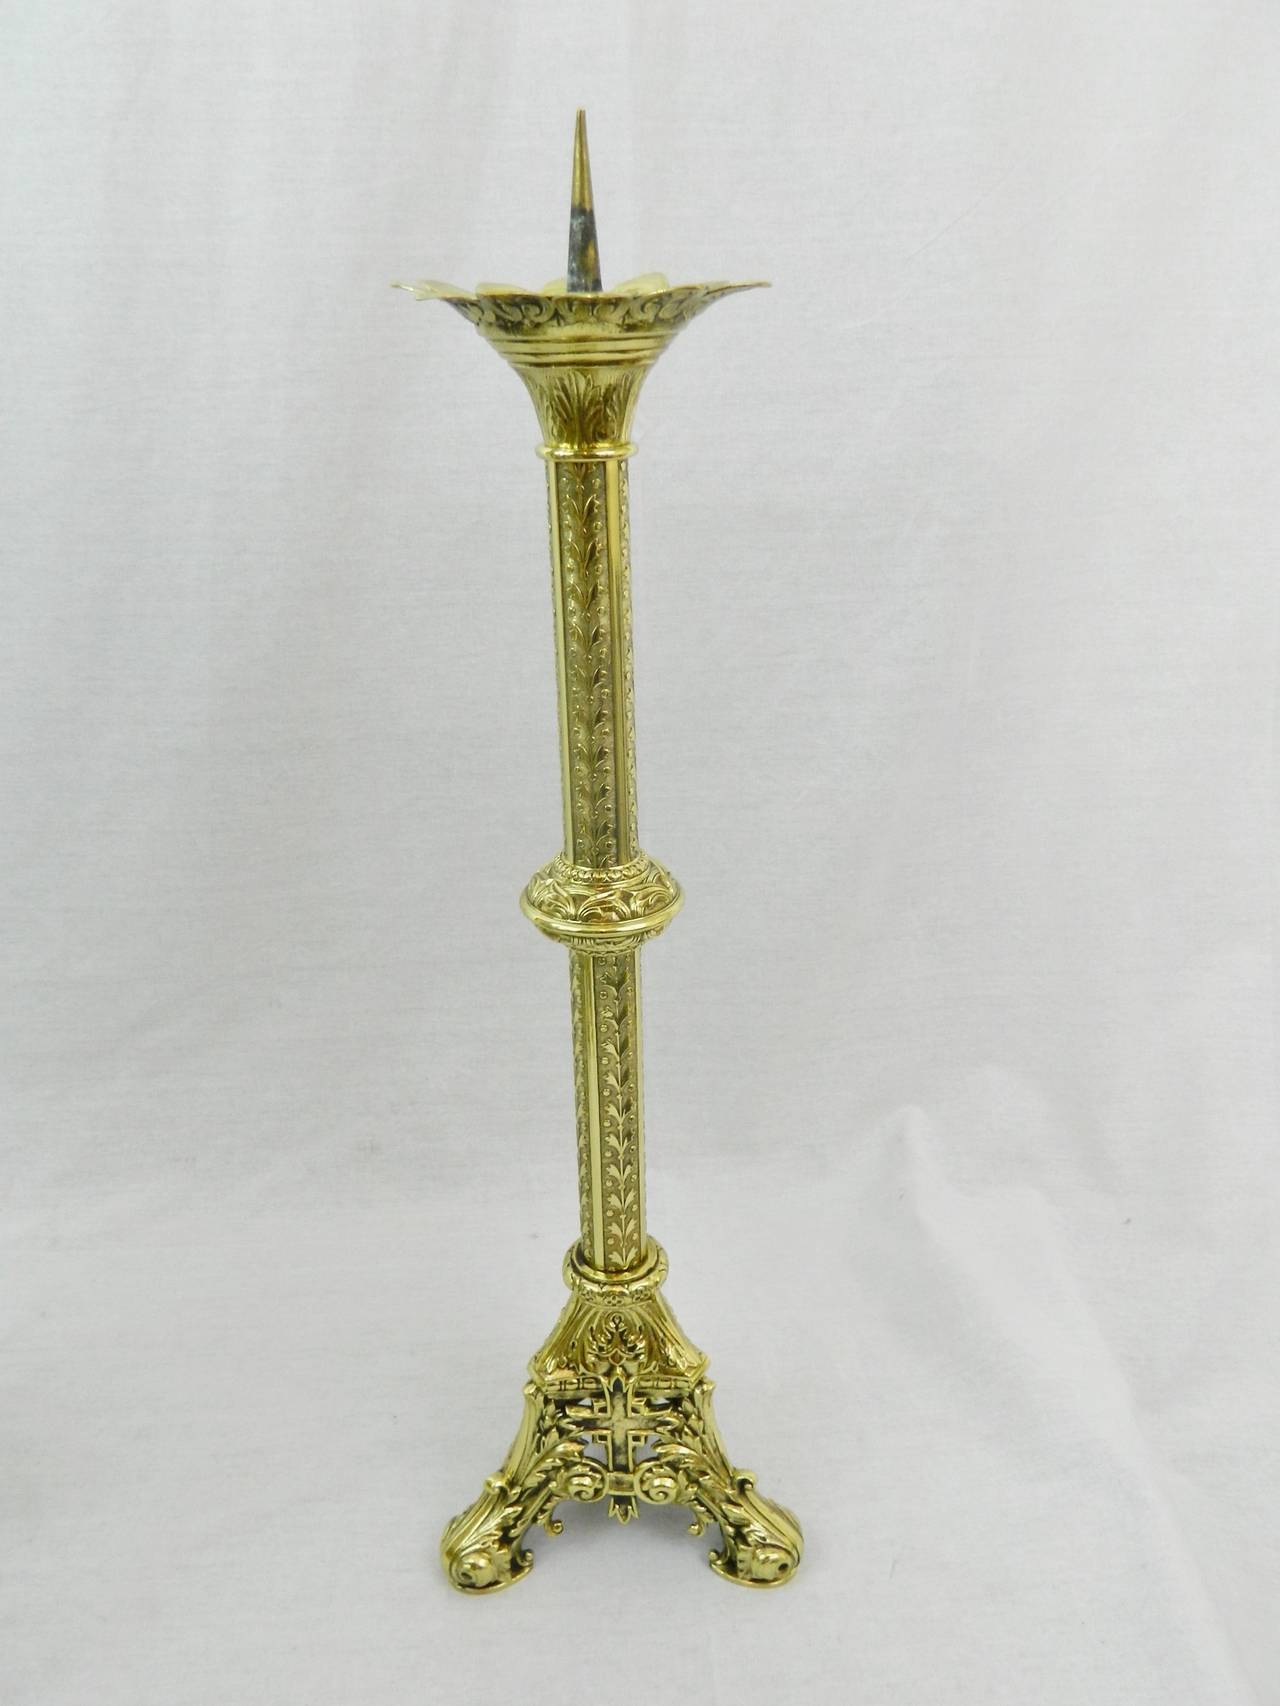 19th Century Polished Brass Decorative Prickets or Candlesticks 2